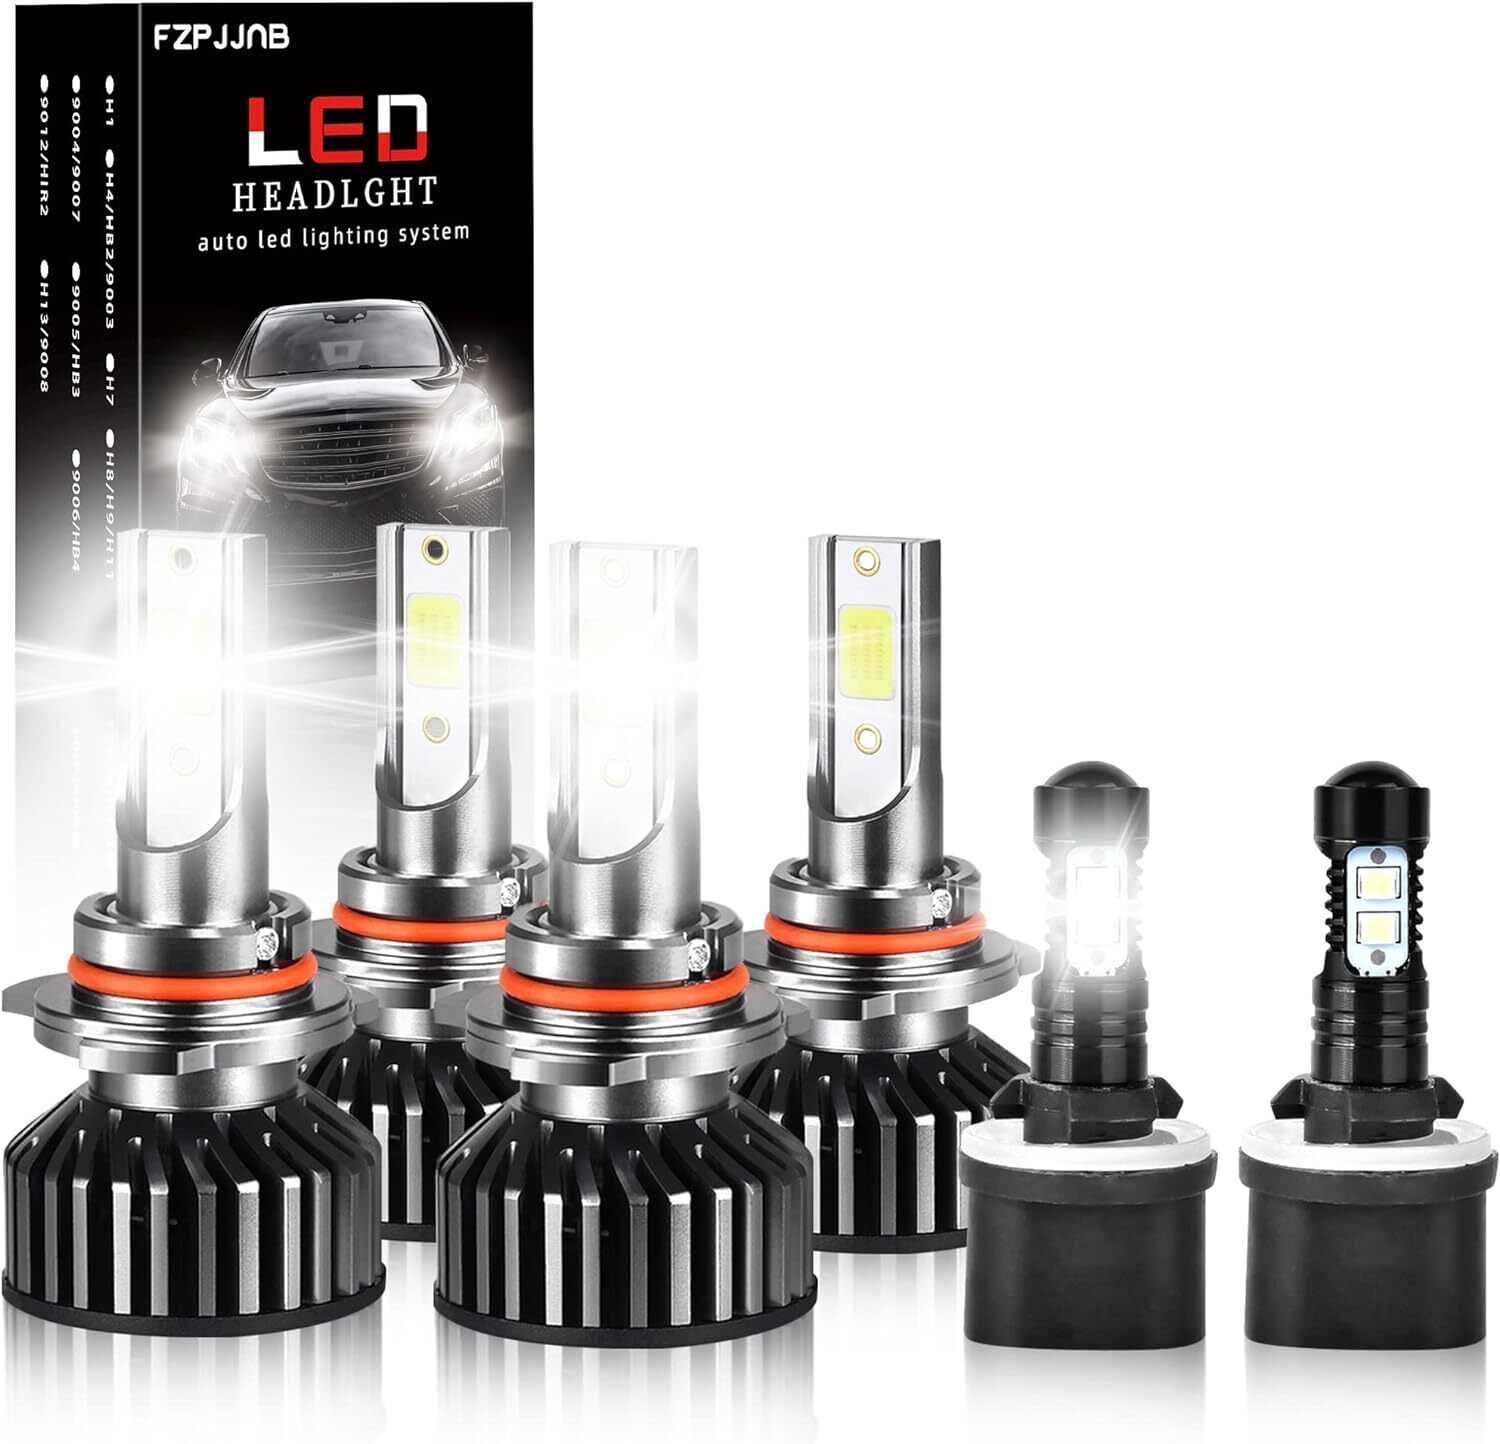 Fit for TAHOE(2000-2006) LED Headlight Bulbs 9005+9006 High/Low Beam + 880 LED